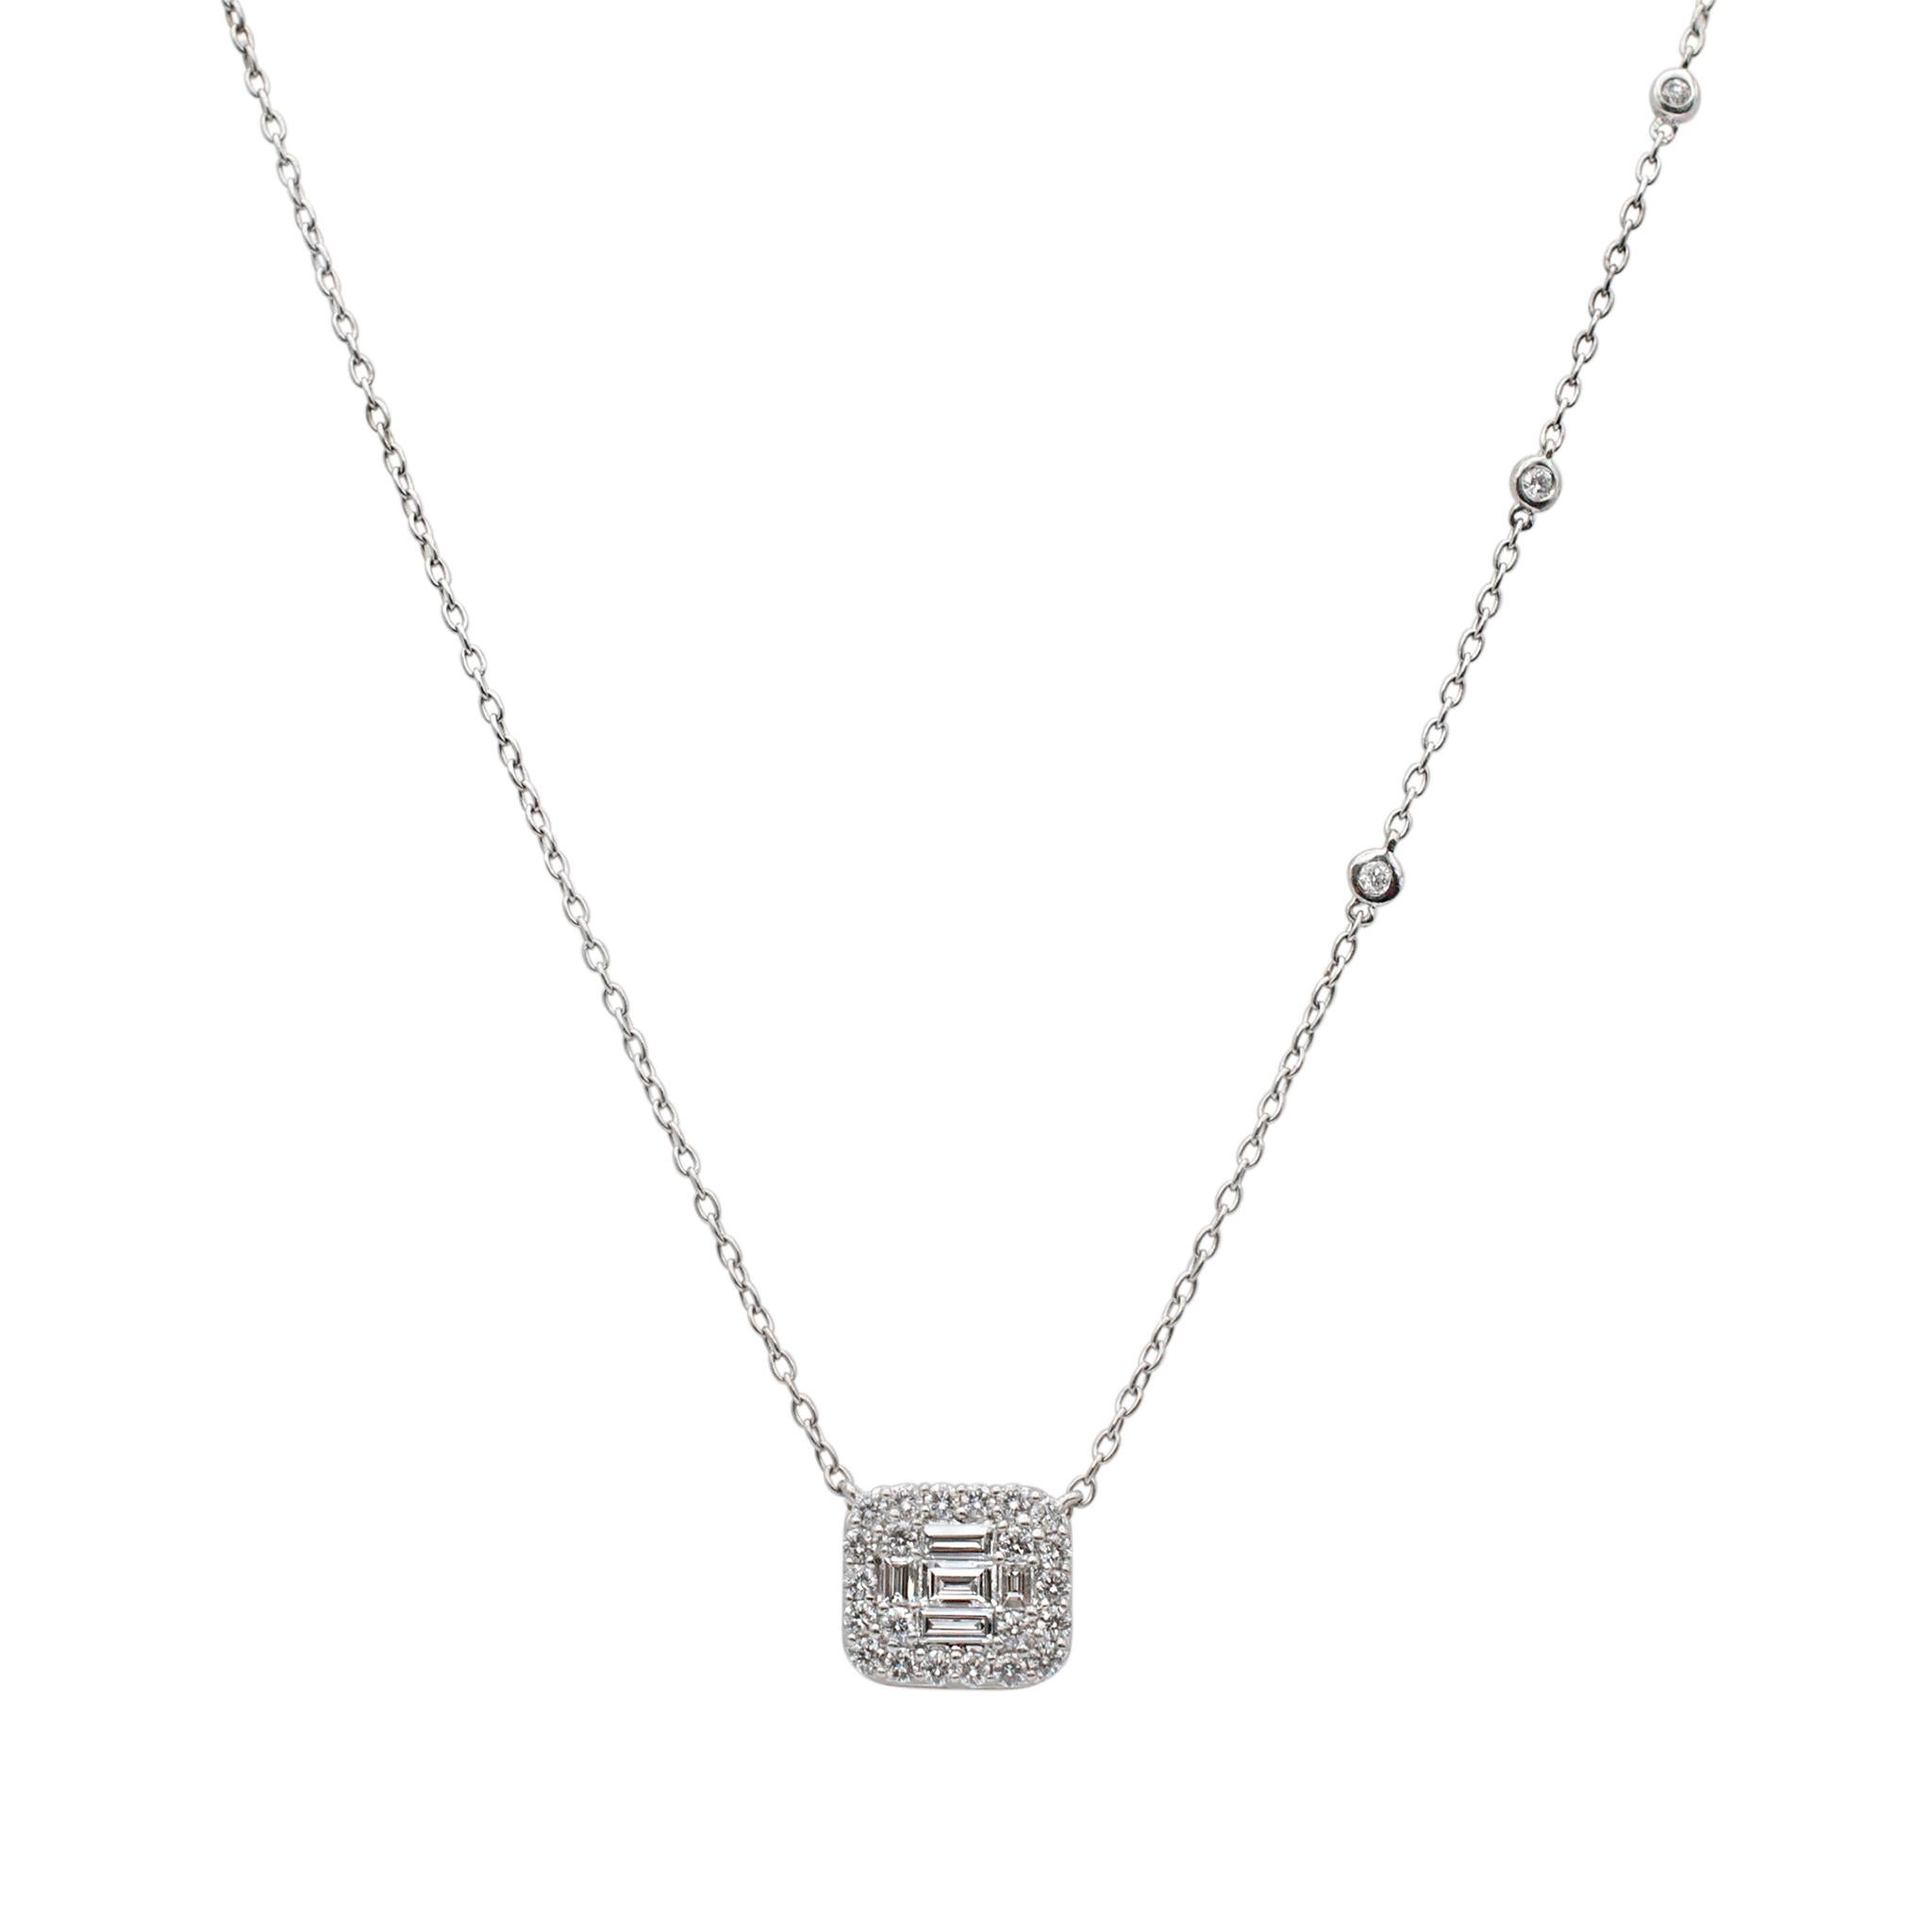 Gender: Ladies

Metal Type: White Gold 

Length: 20.00 inches

Weight: 4.19 grams

One ladies custom-made polished 14K white gold single strand collar, diamond necklace. The metal was tested and determined to be 14K white gold. Engraved with 